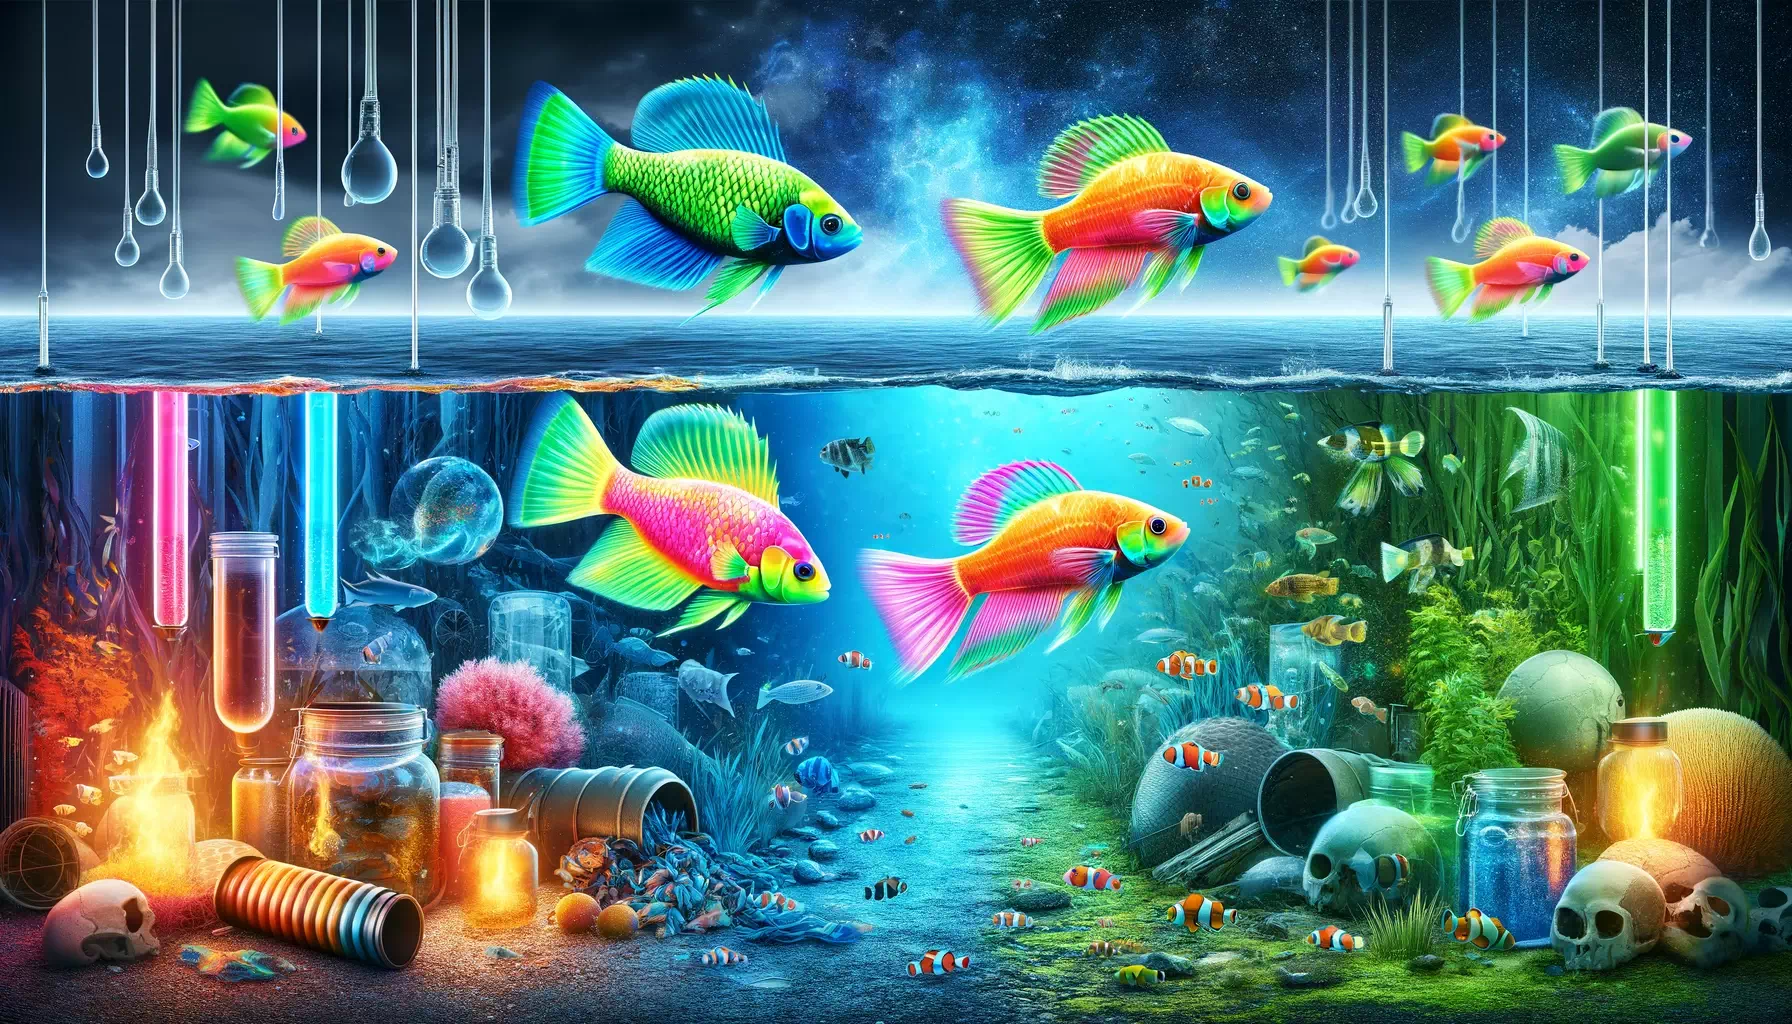 vibrant and thought-provoking scene depicting GloFish in their genetically modified, fluorescent colors, swimming alongside natural fish species in